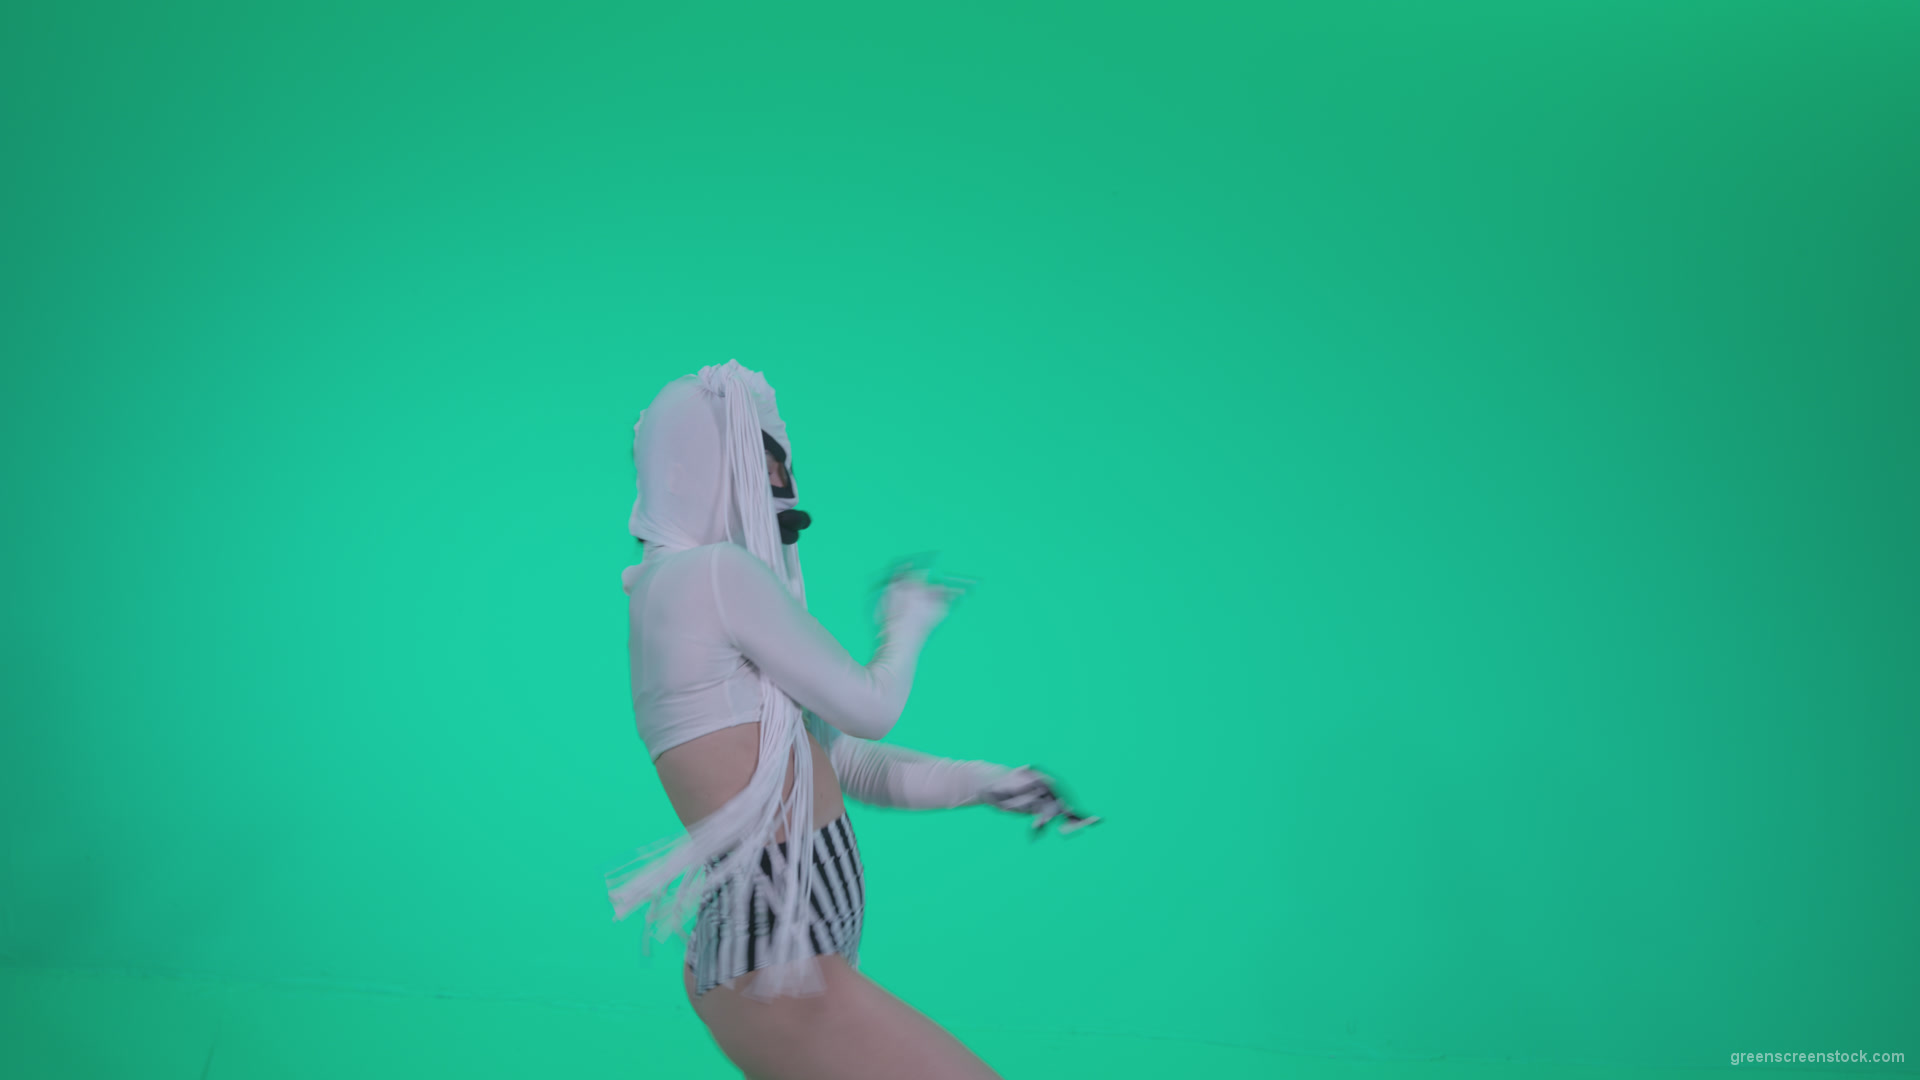 Go-go-Dancer-with-Latex-Top-t9-Green-Screen-Video-Footage_002 Green Screen Stock